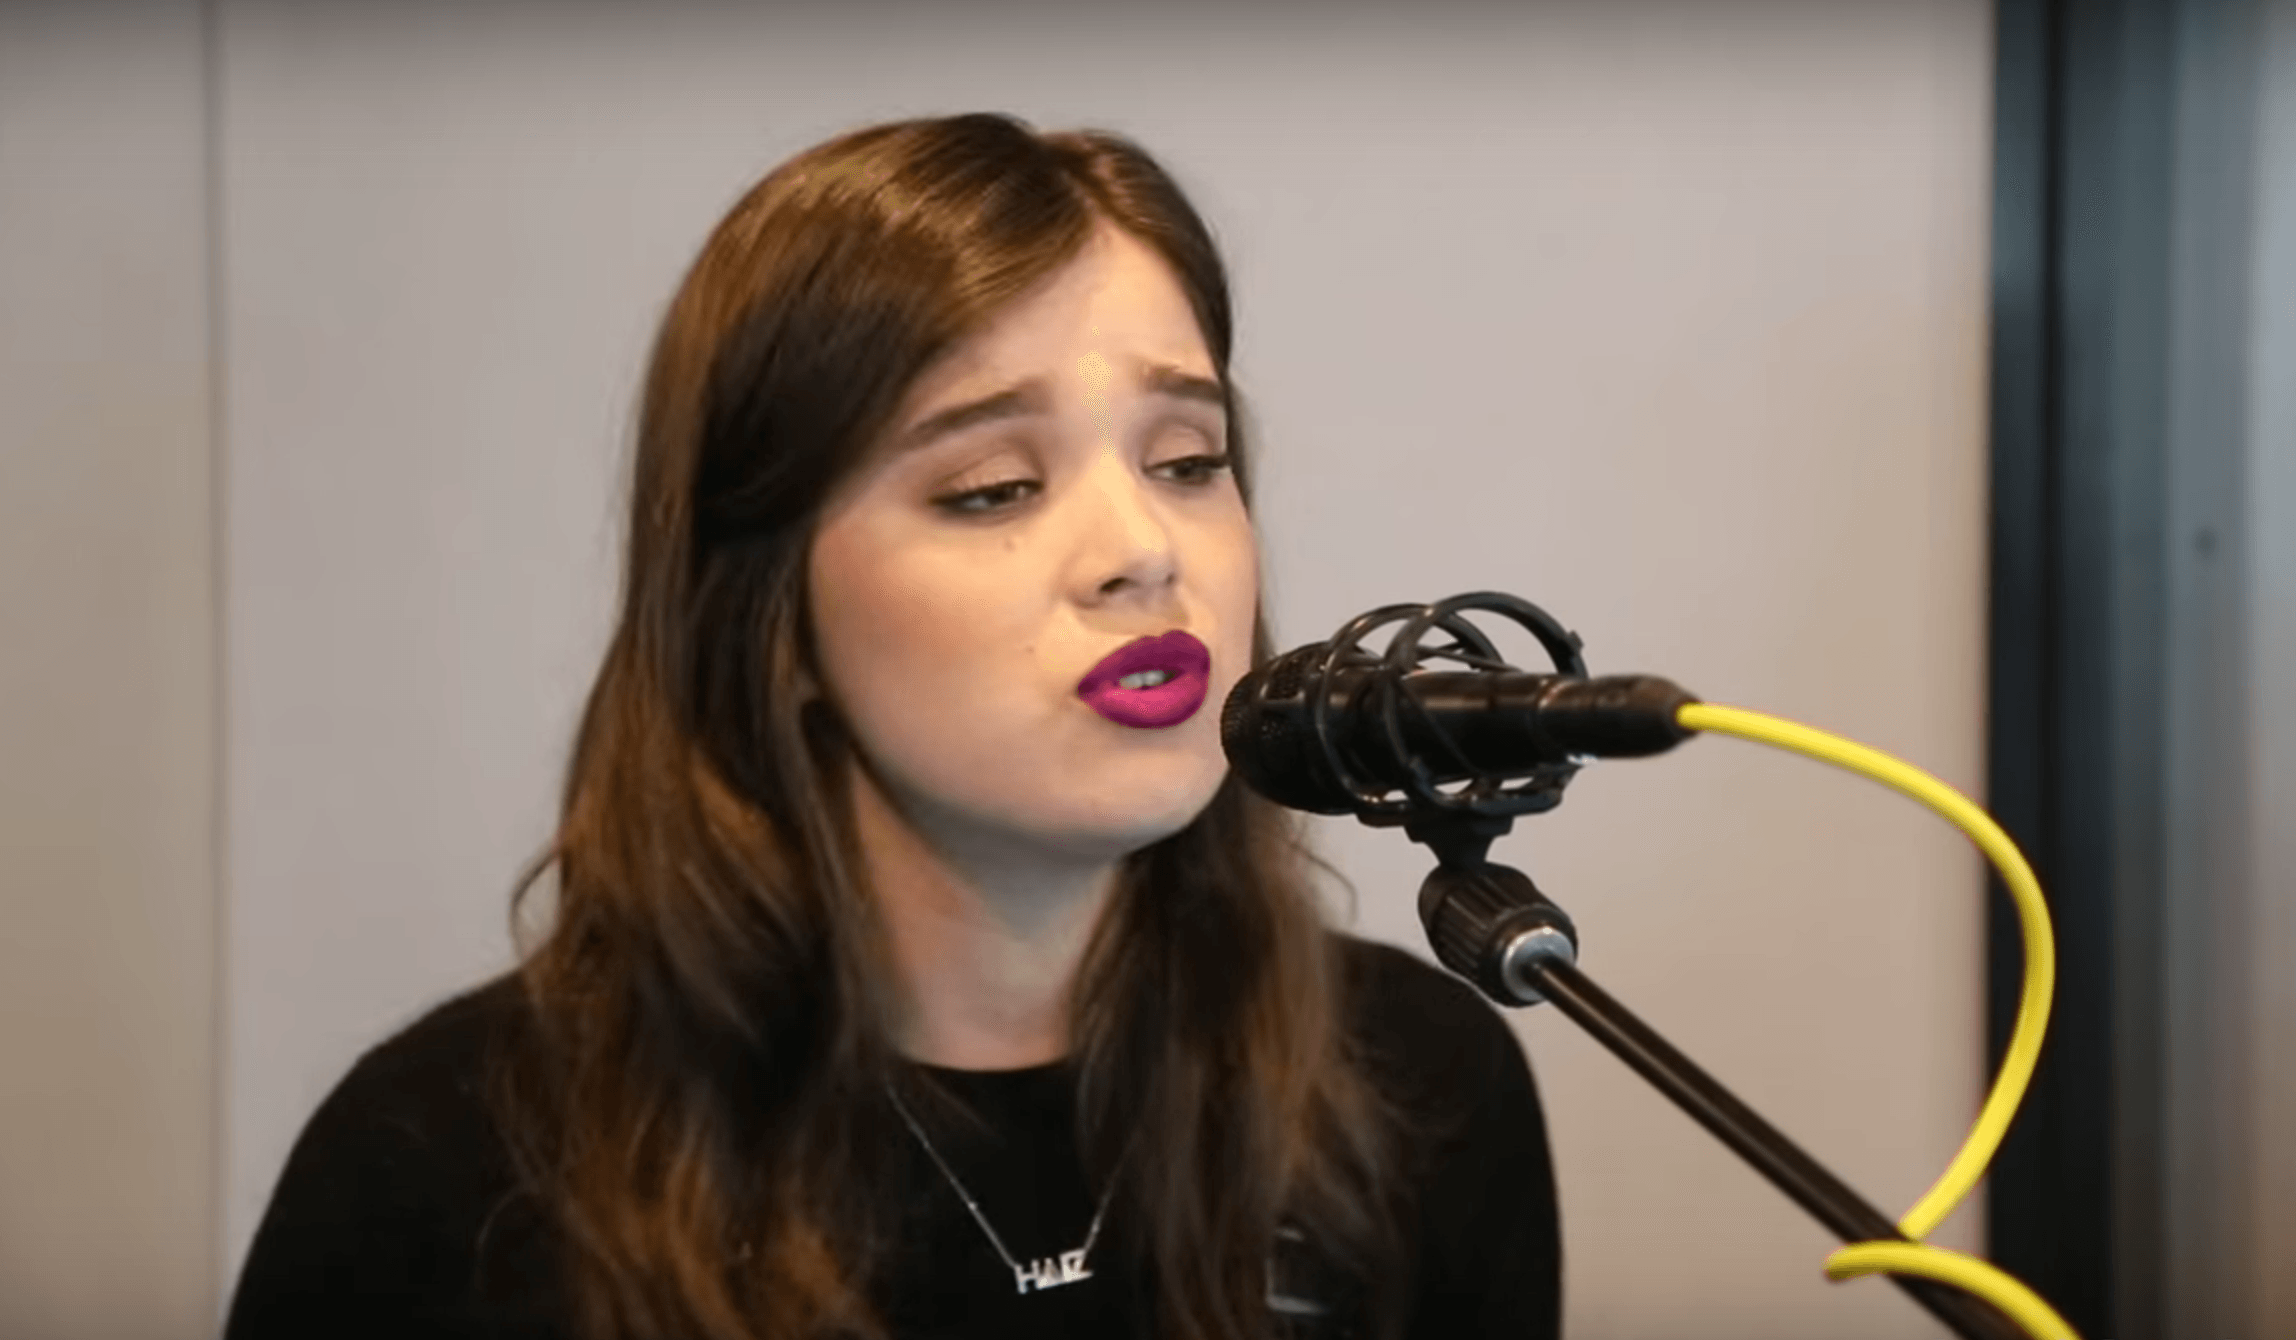 WATCH: Hailee Steinfeld covers Justin Bieber’s ‘Love Yourself’